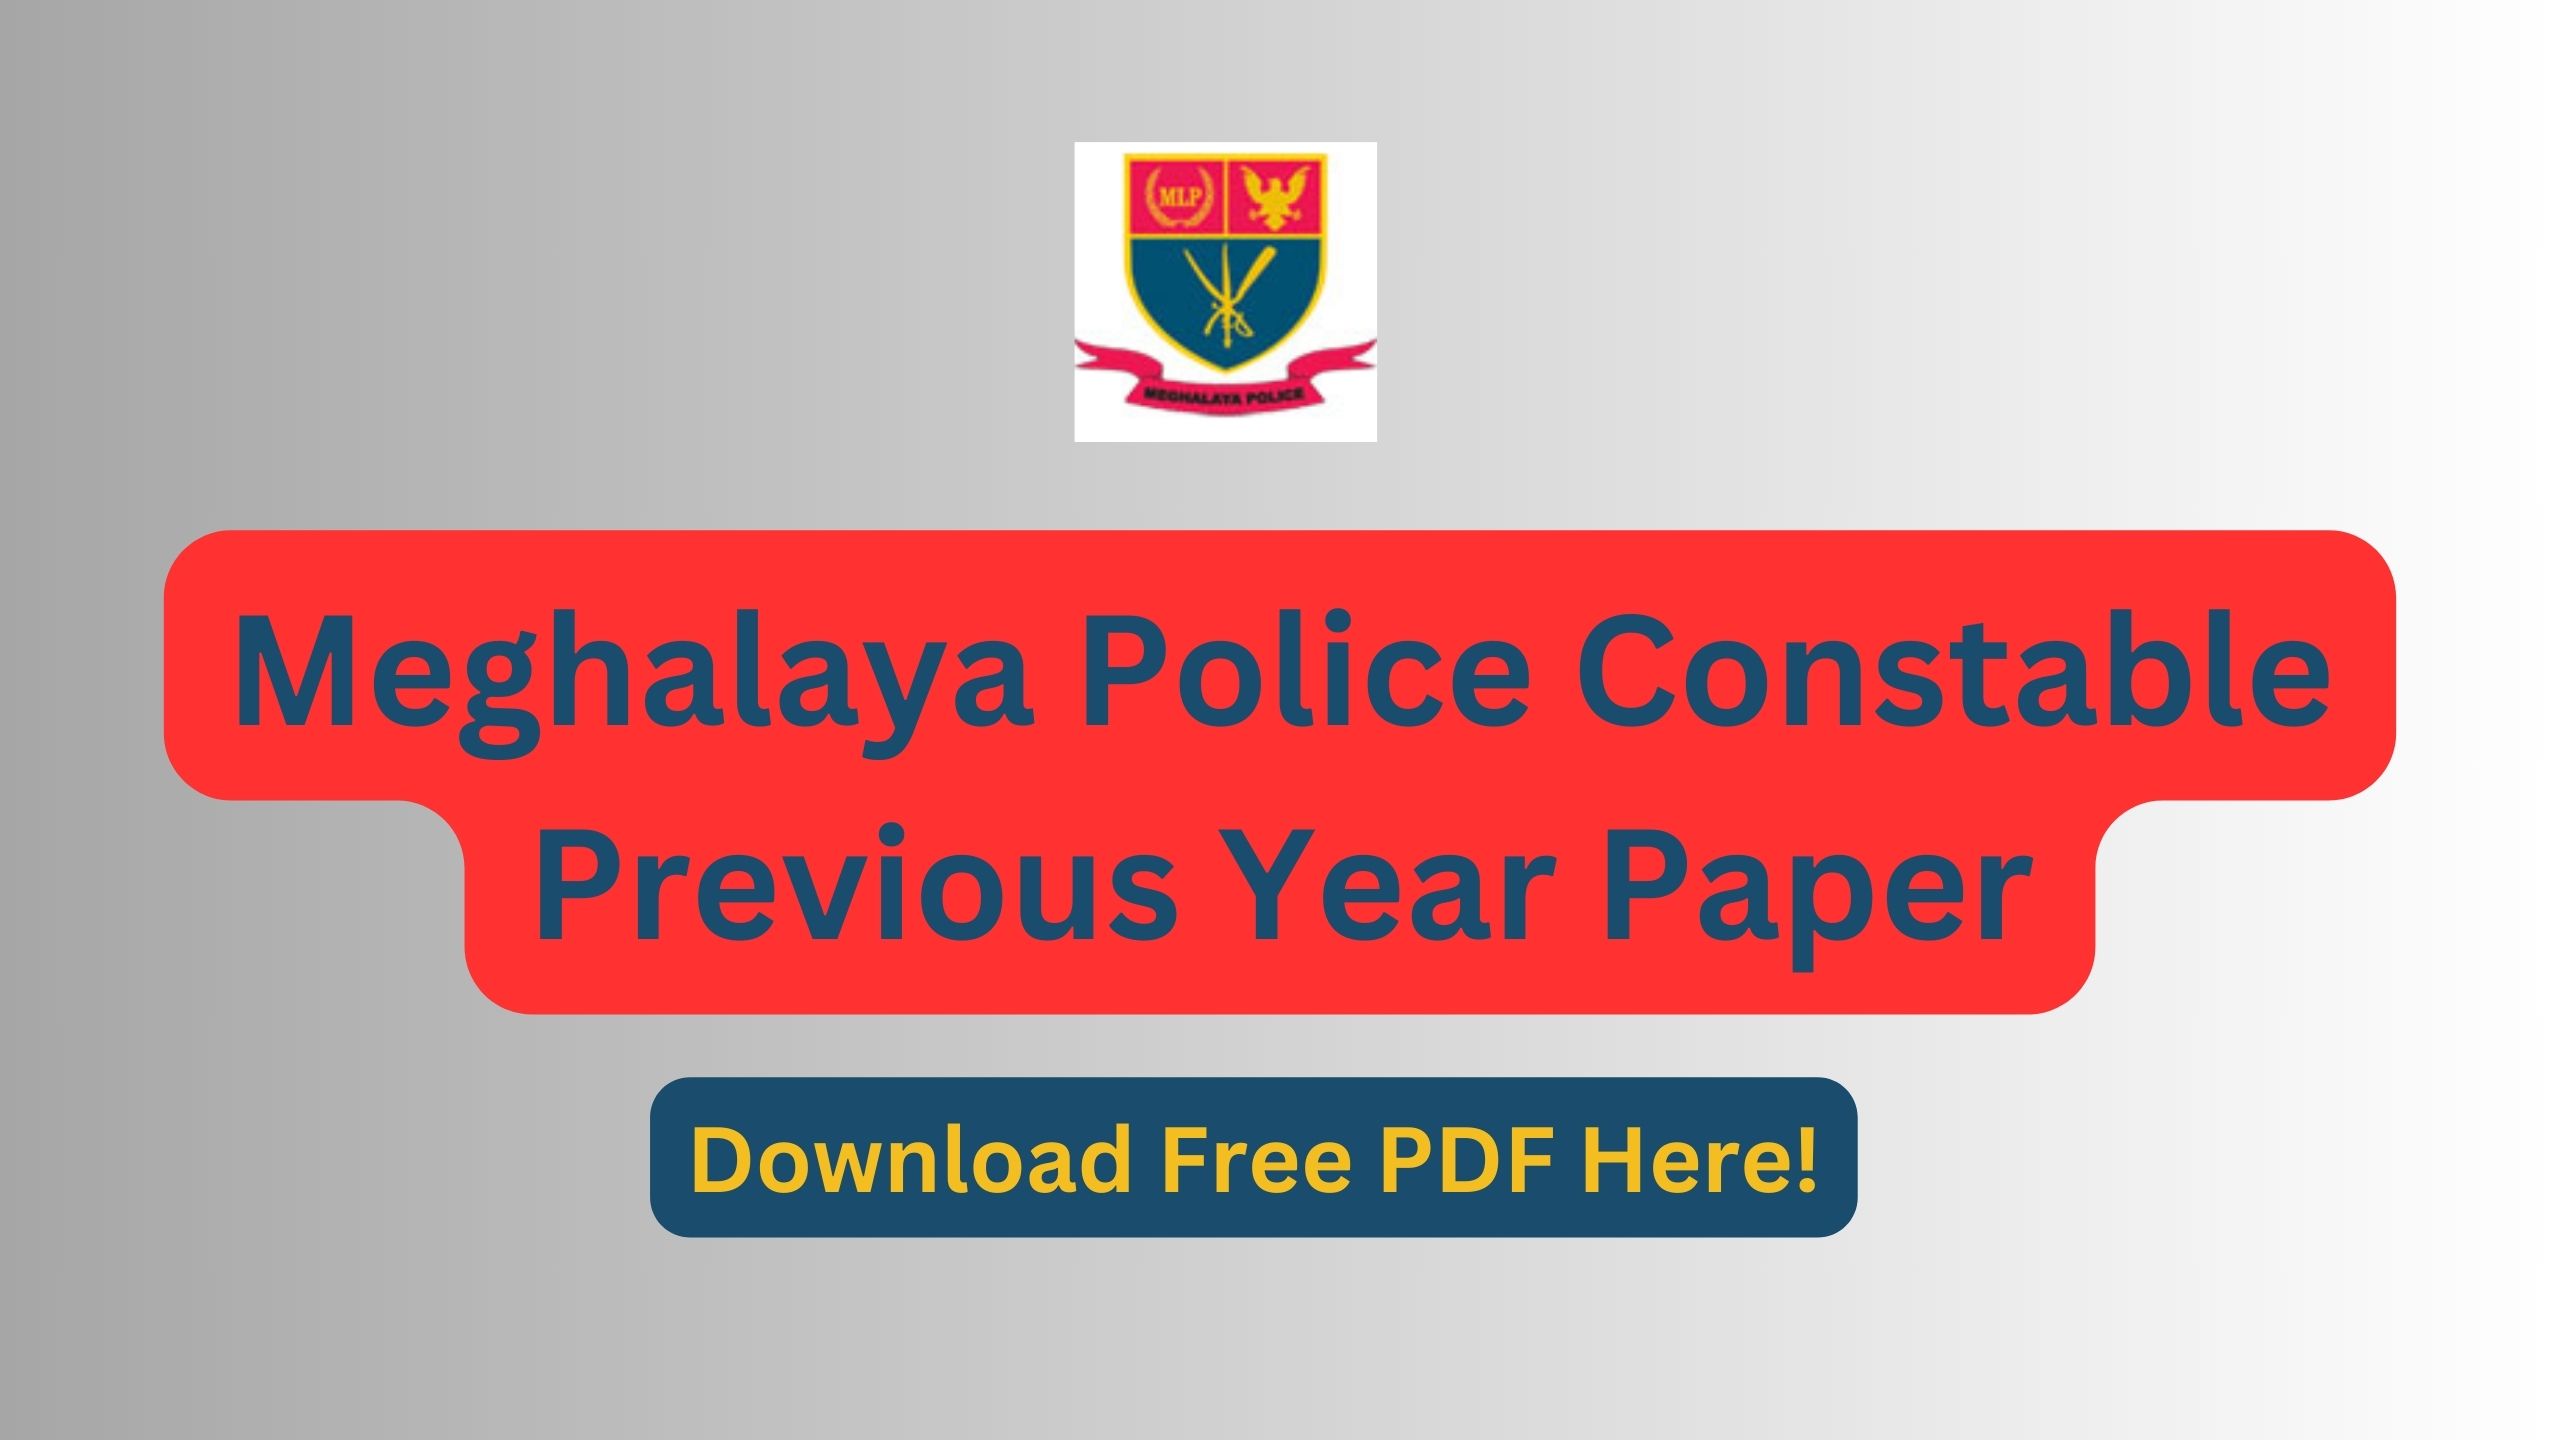 Meghalaya Police Constable Previous Year Papers, Download UB and AB Old Papers!